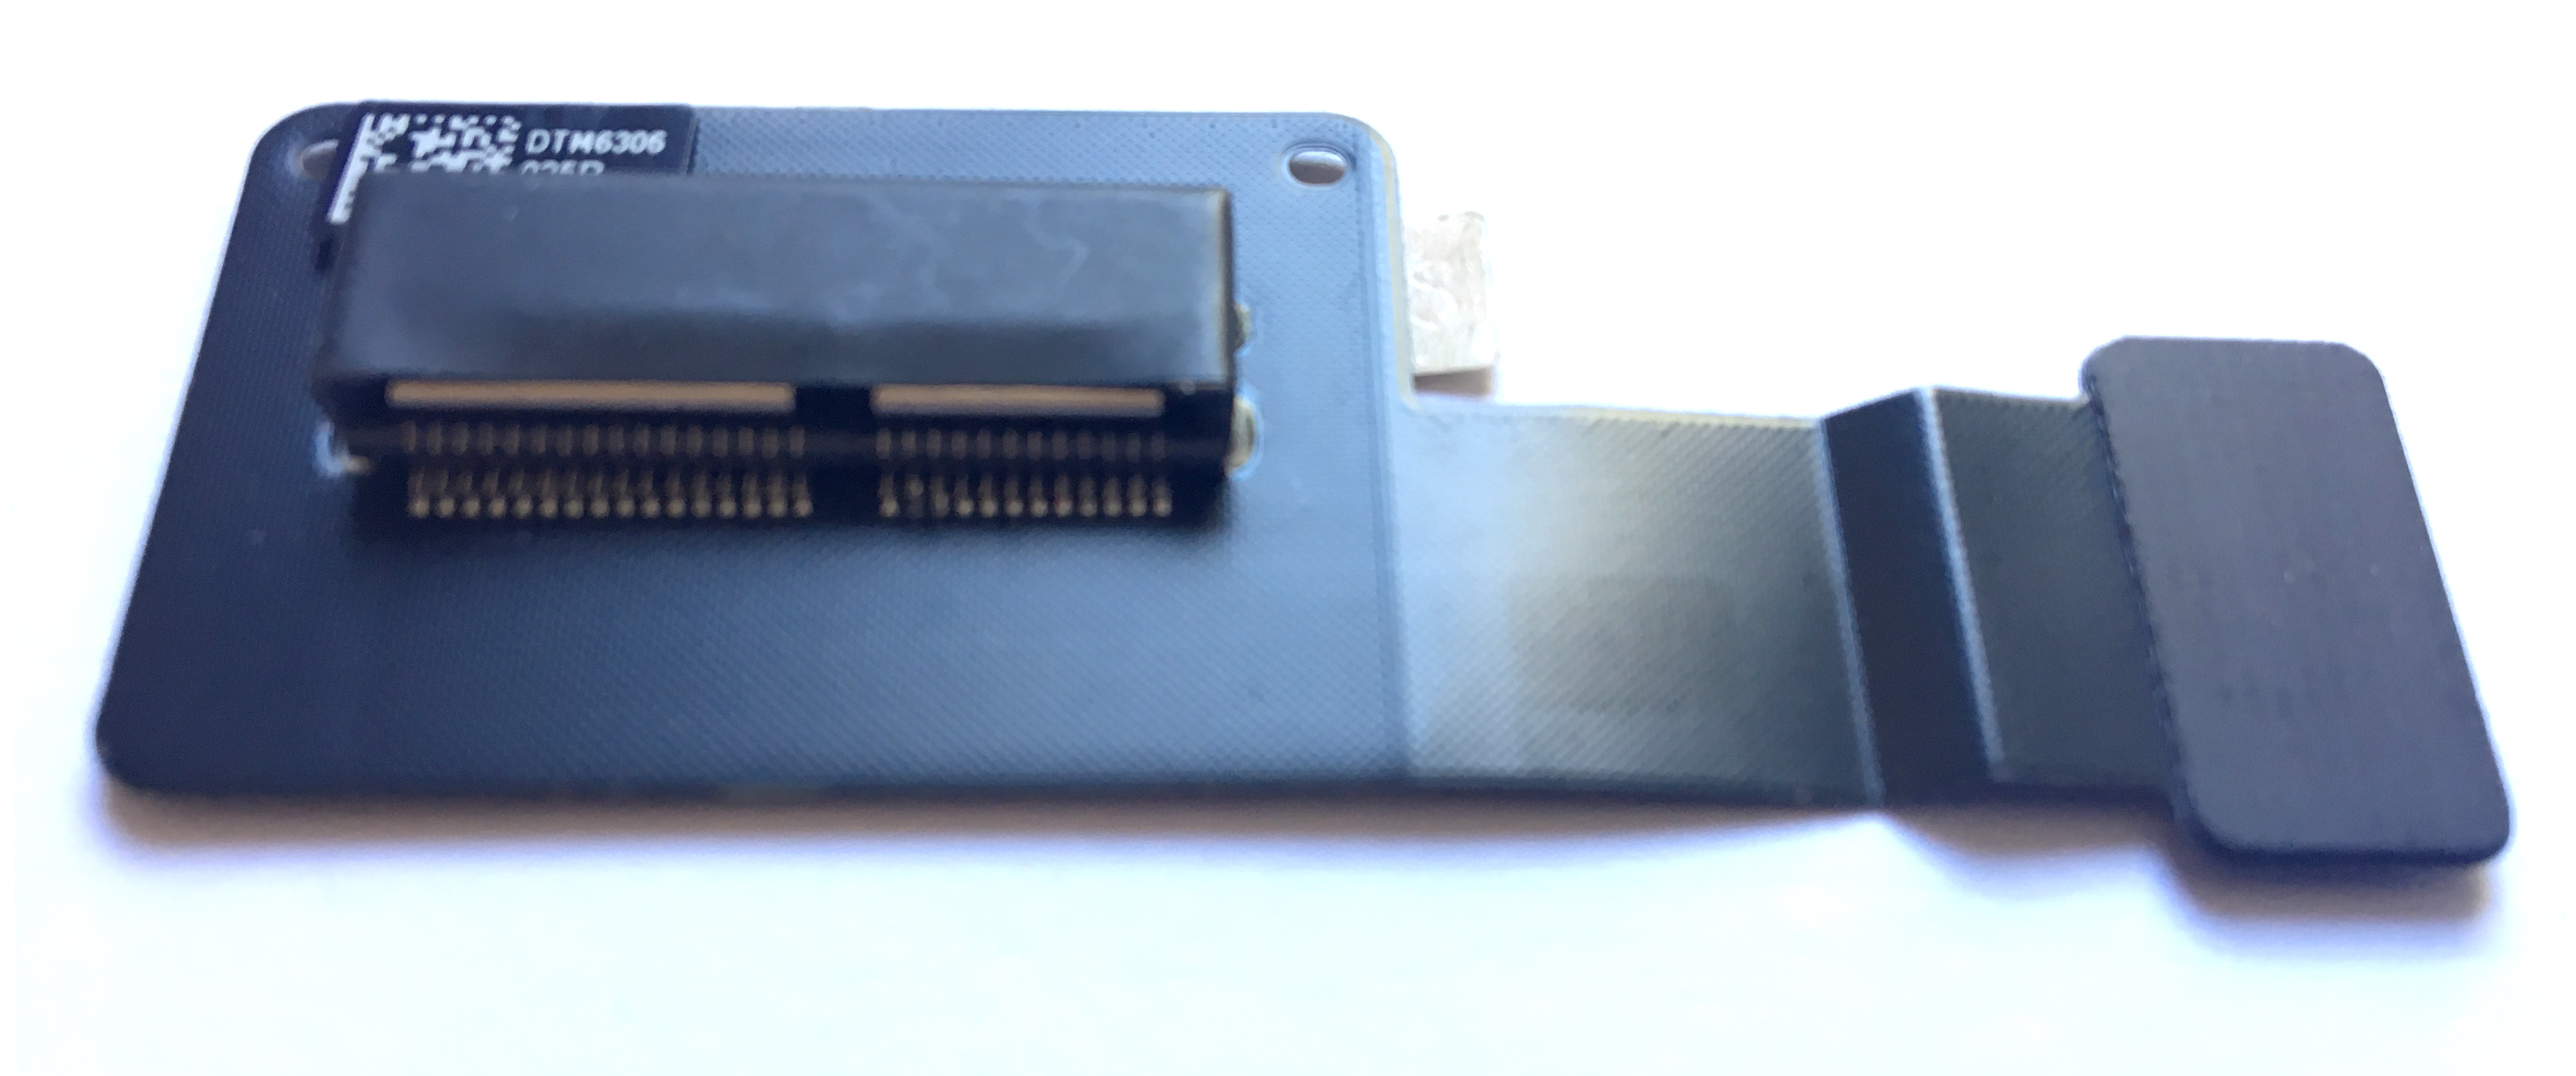 PCIe SSD Kabel for Mac Mini 2014 - 821-00010-A